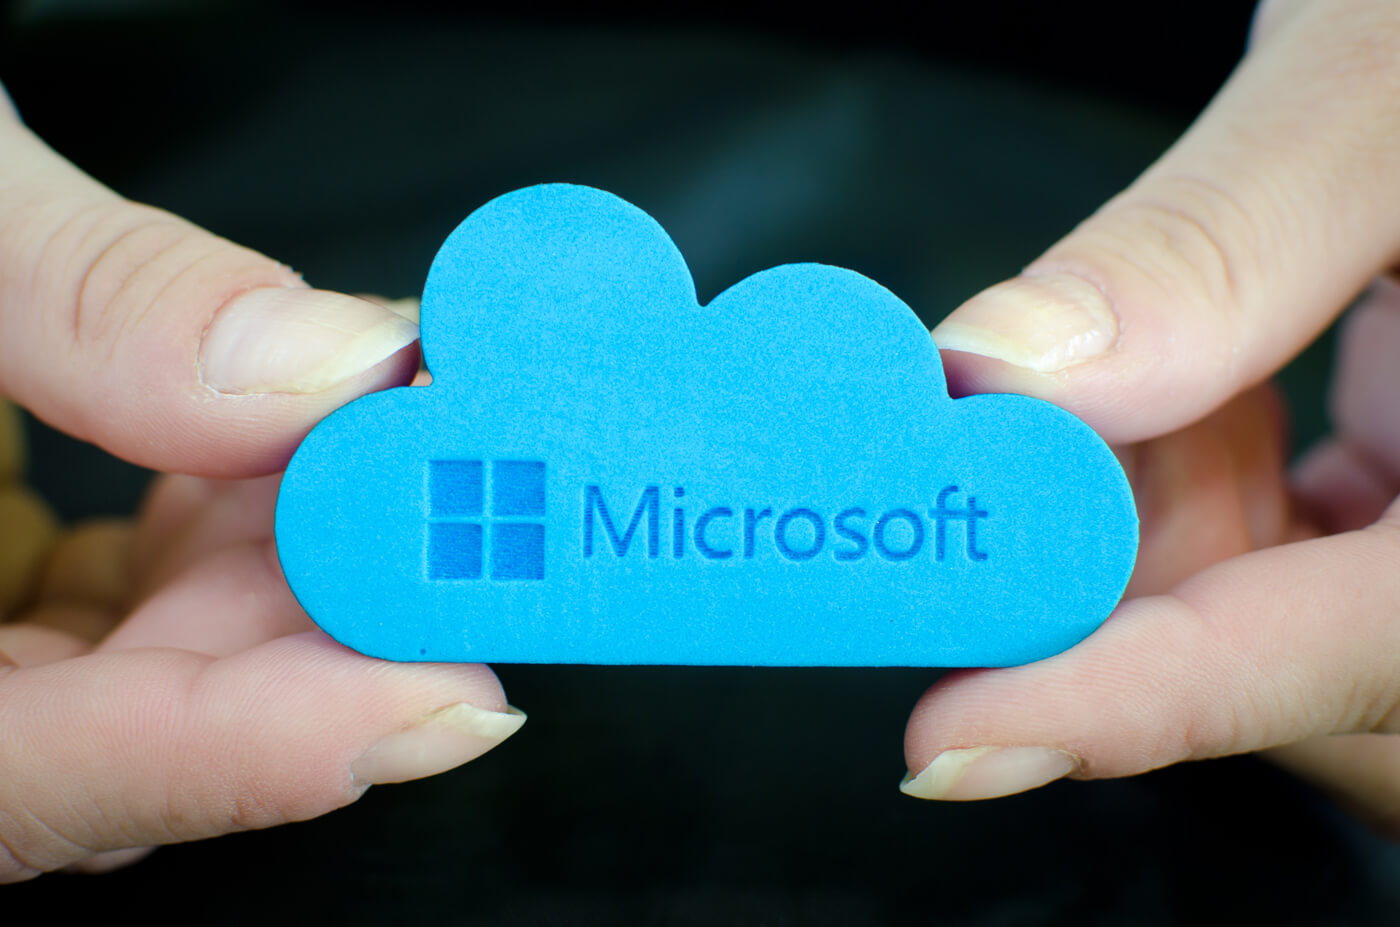 Microsoft sees astonishing 775 percent surge in cloud services usage due to social distancing